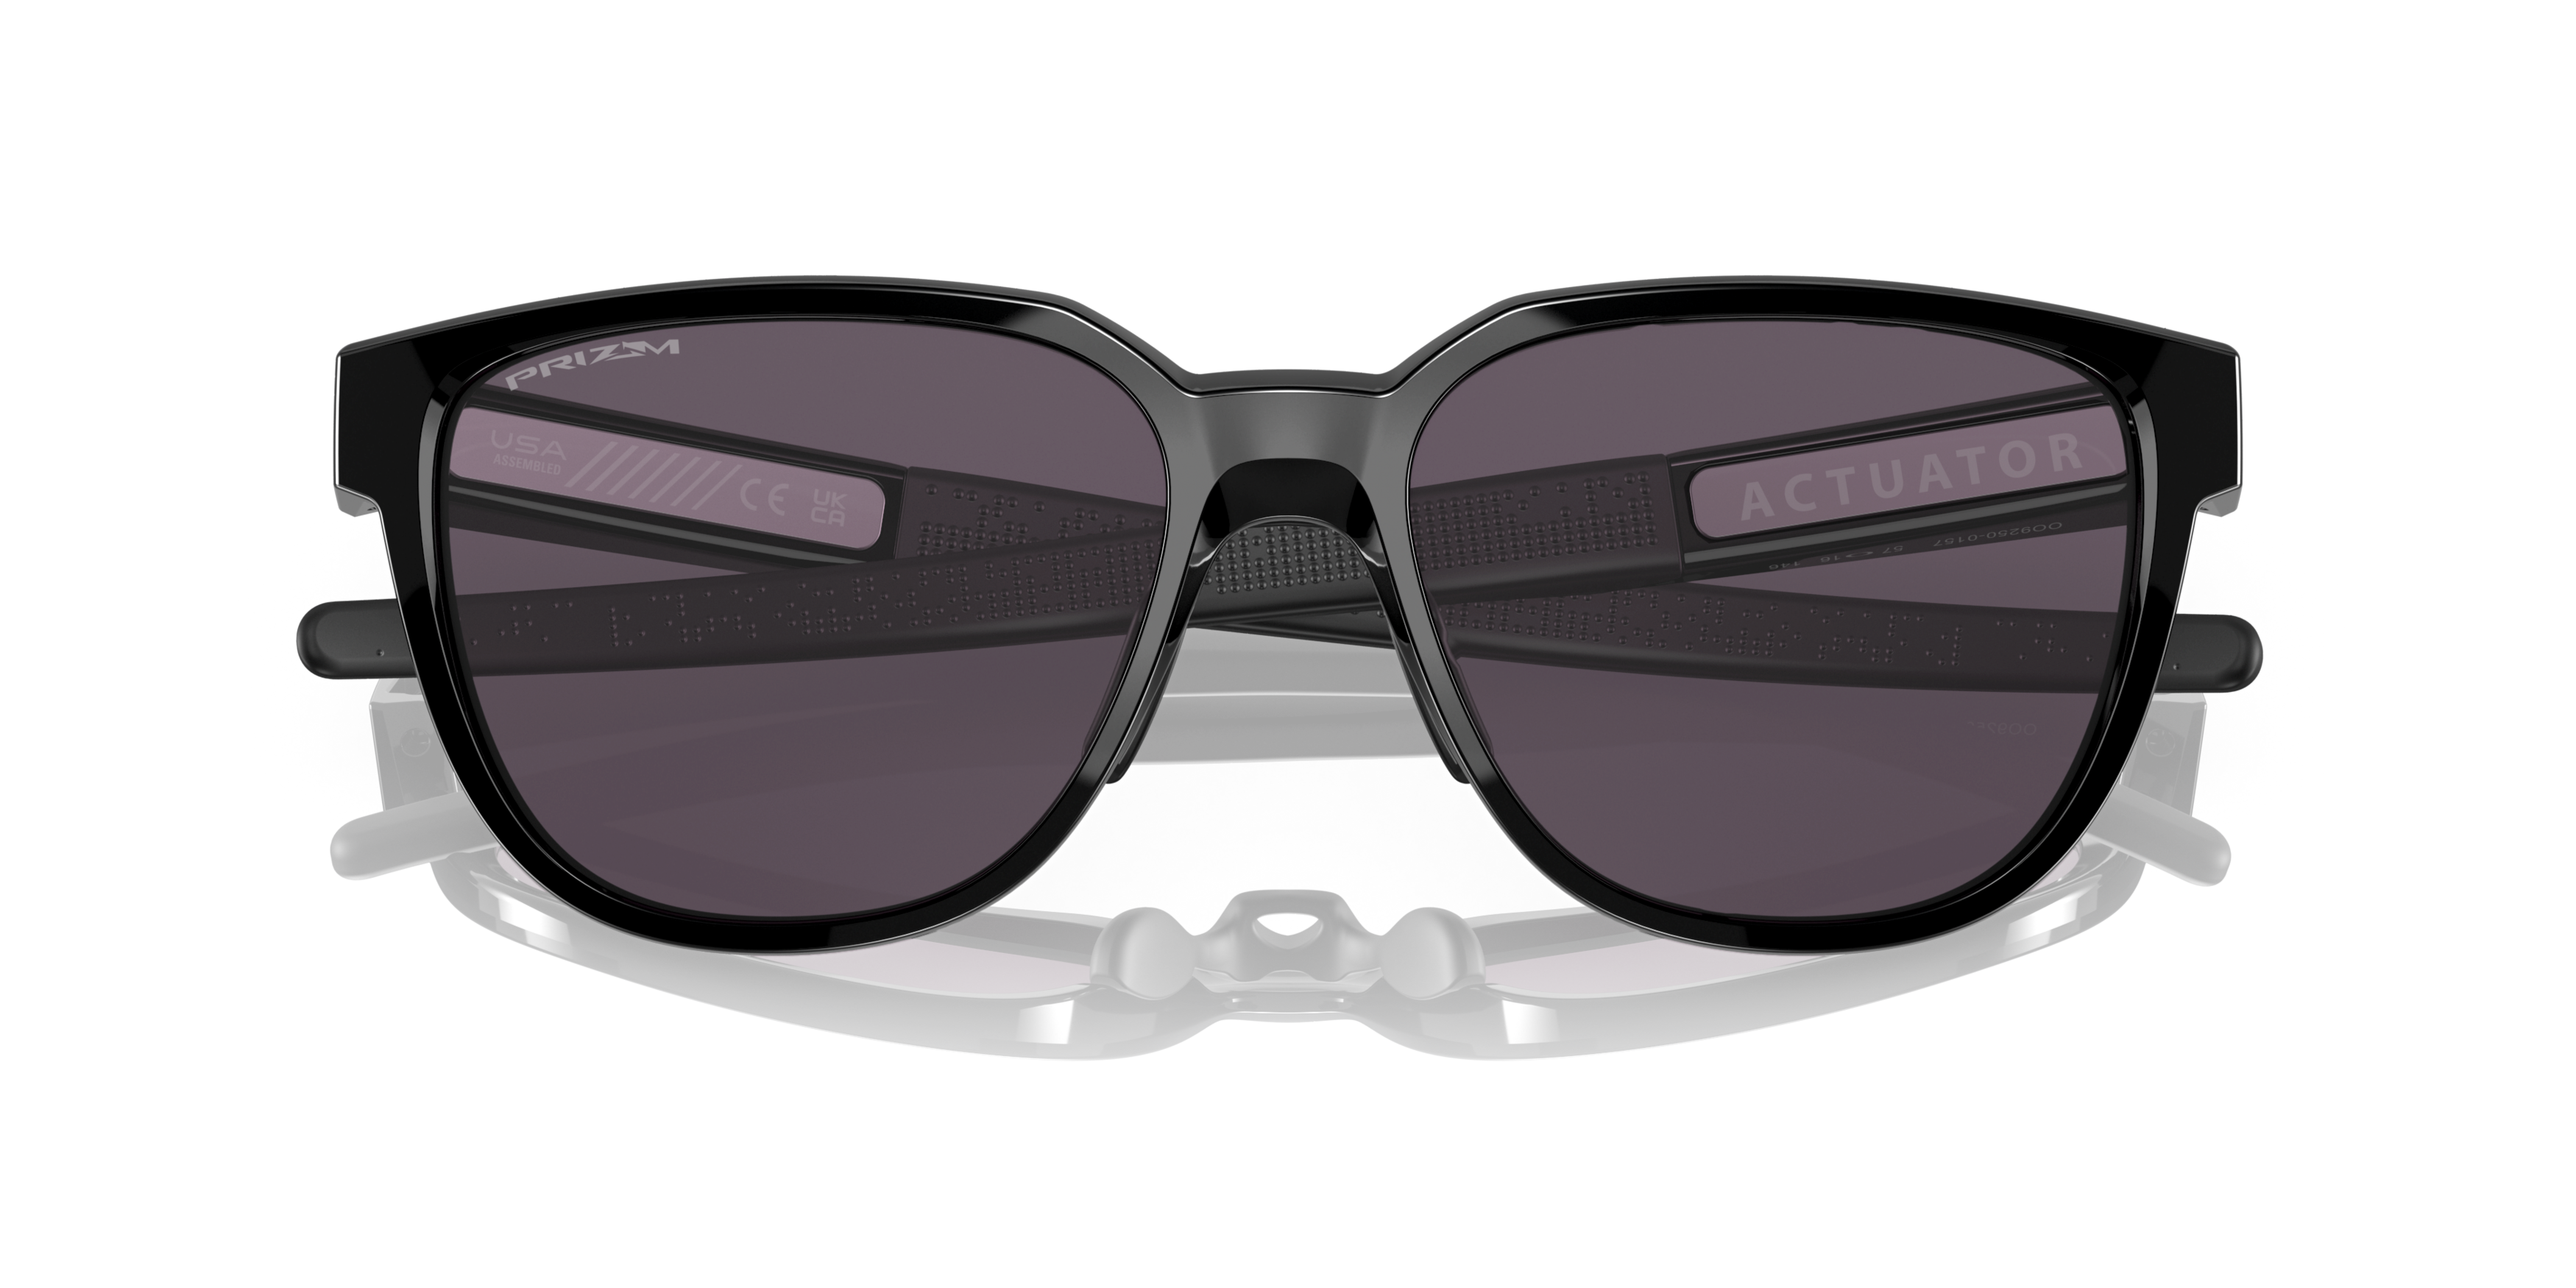 [products.image.folded] Oakley Actuator OO9250 0157